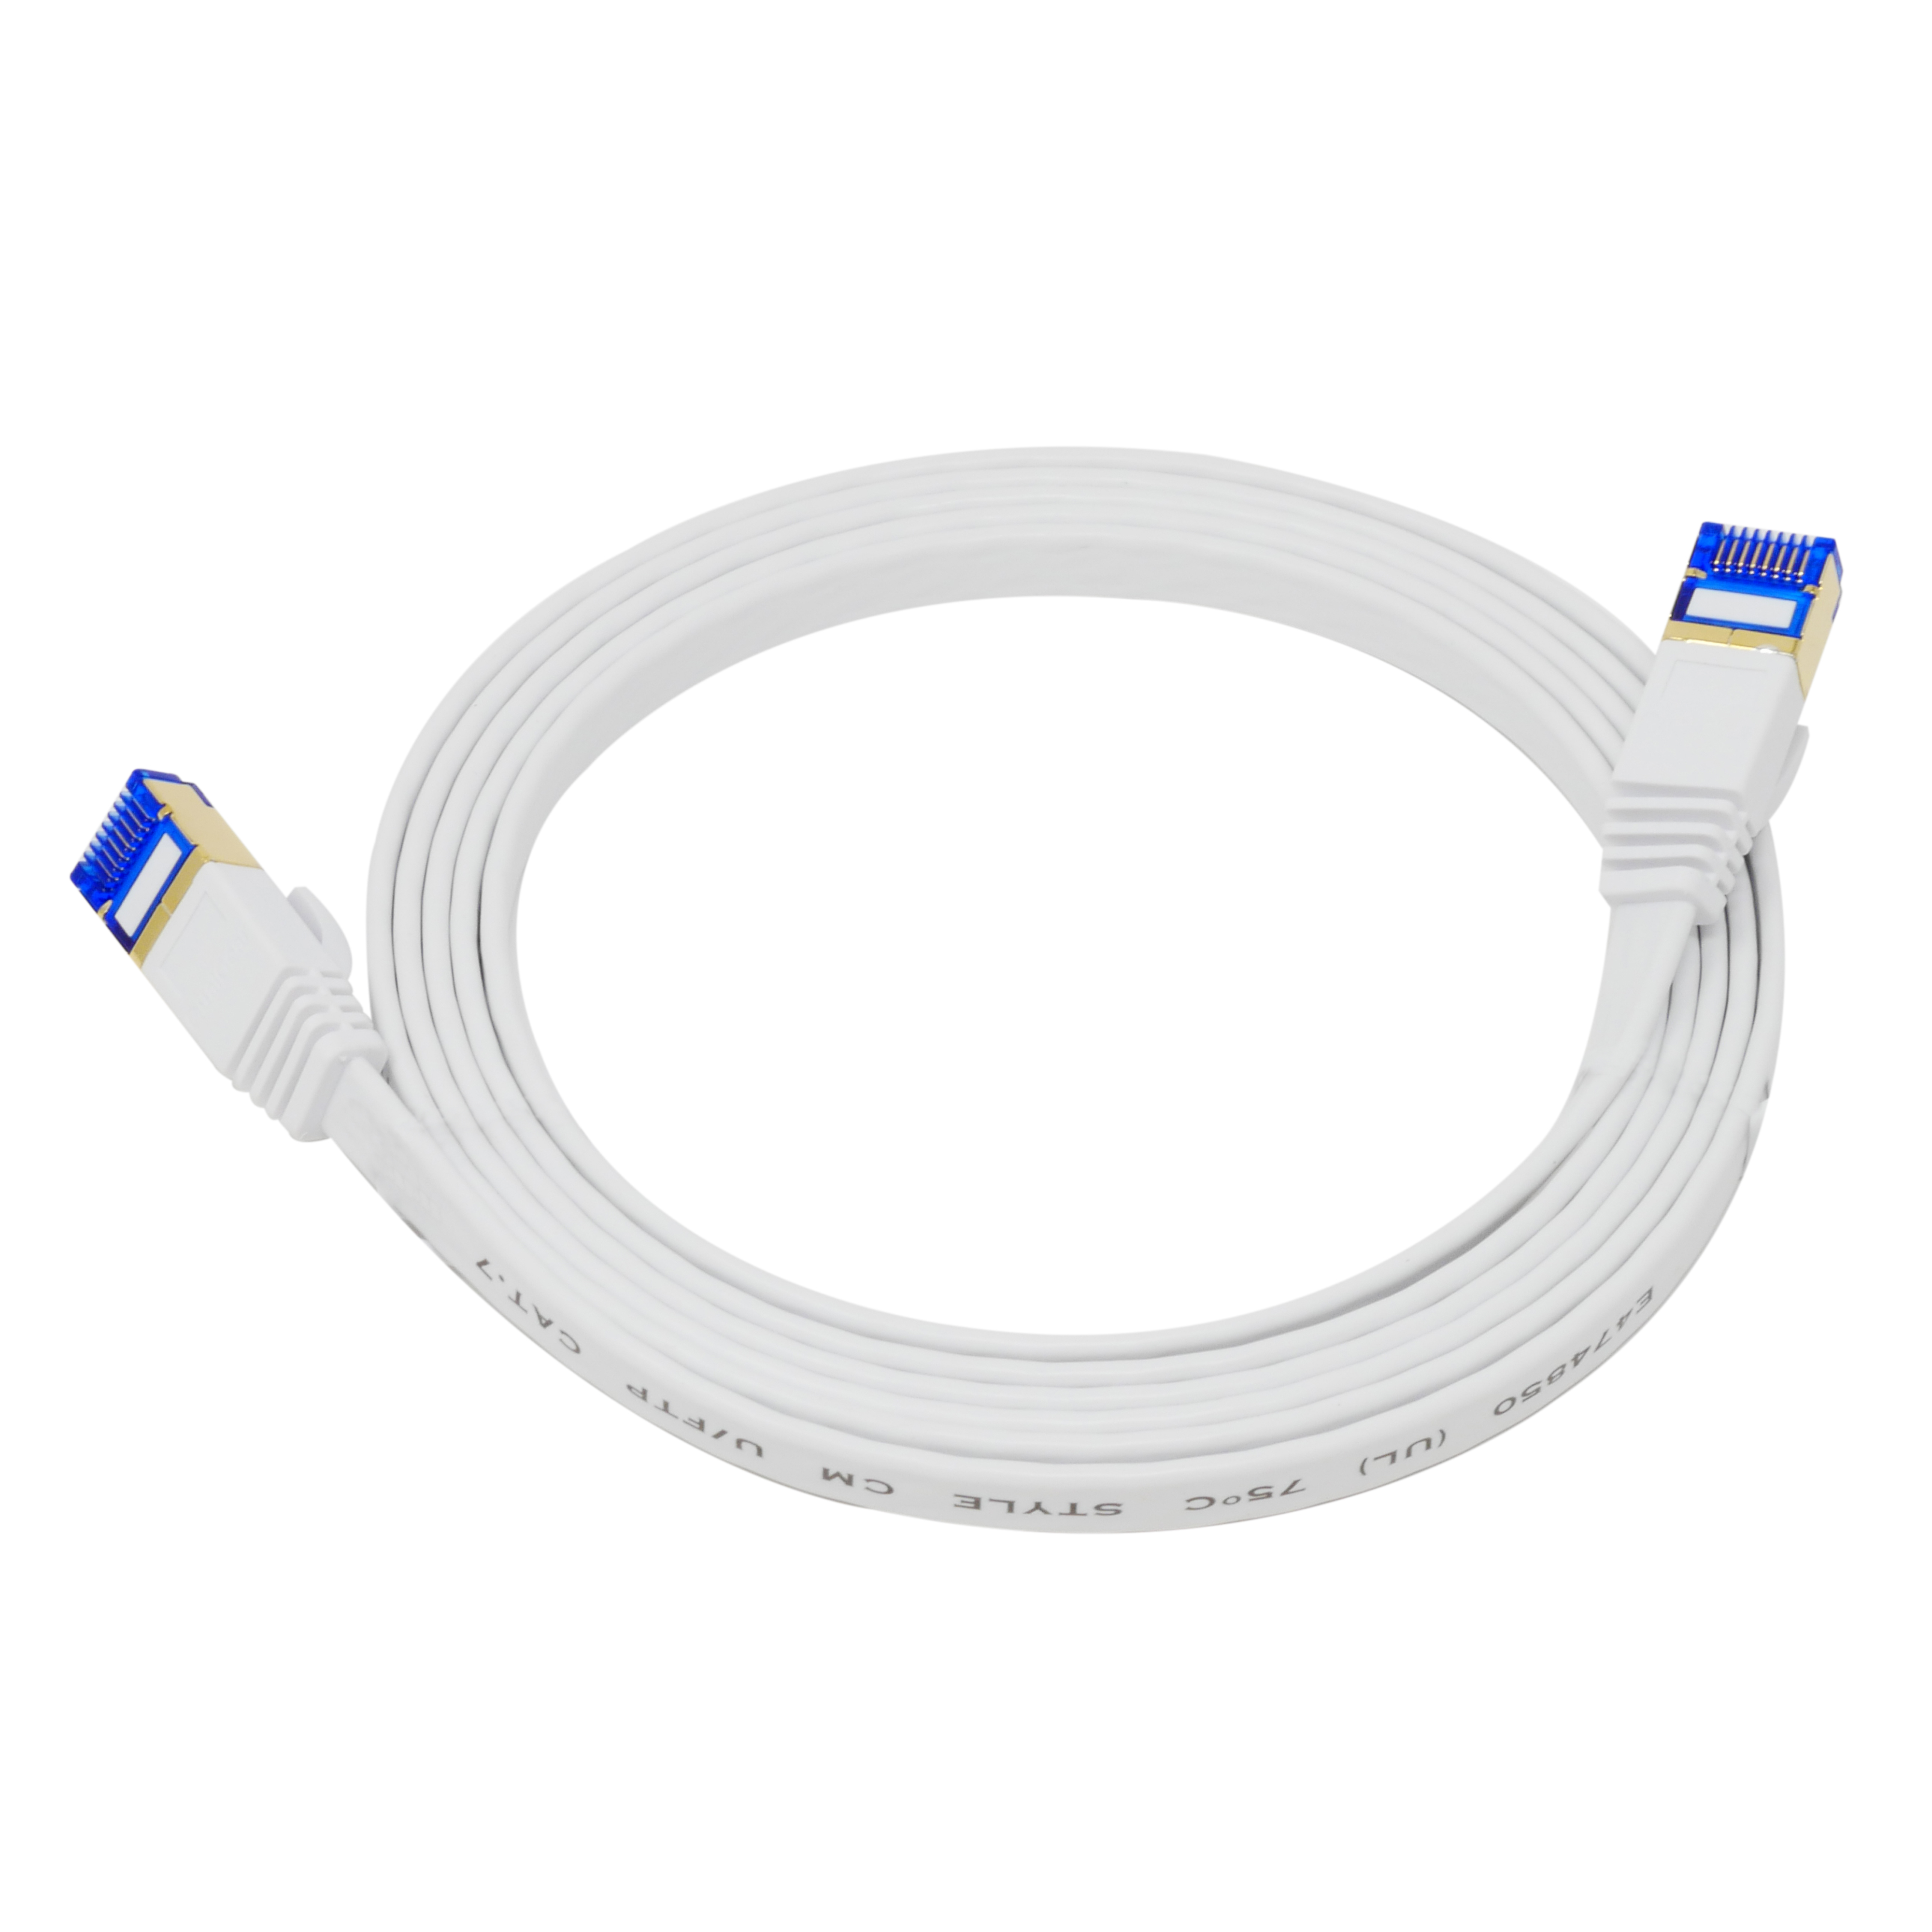 QualGear QG-CAT7F-3FT-WHT CAT 7 S/FTP Ethernet Cable Length 3 feet - 26 AWG, 10 Gbps, Gold Plated Contacts, RJ45, 99.99% OFC Copper, Color White 